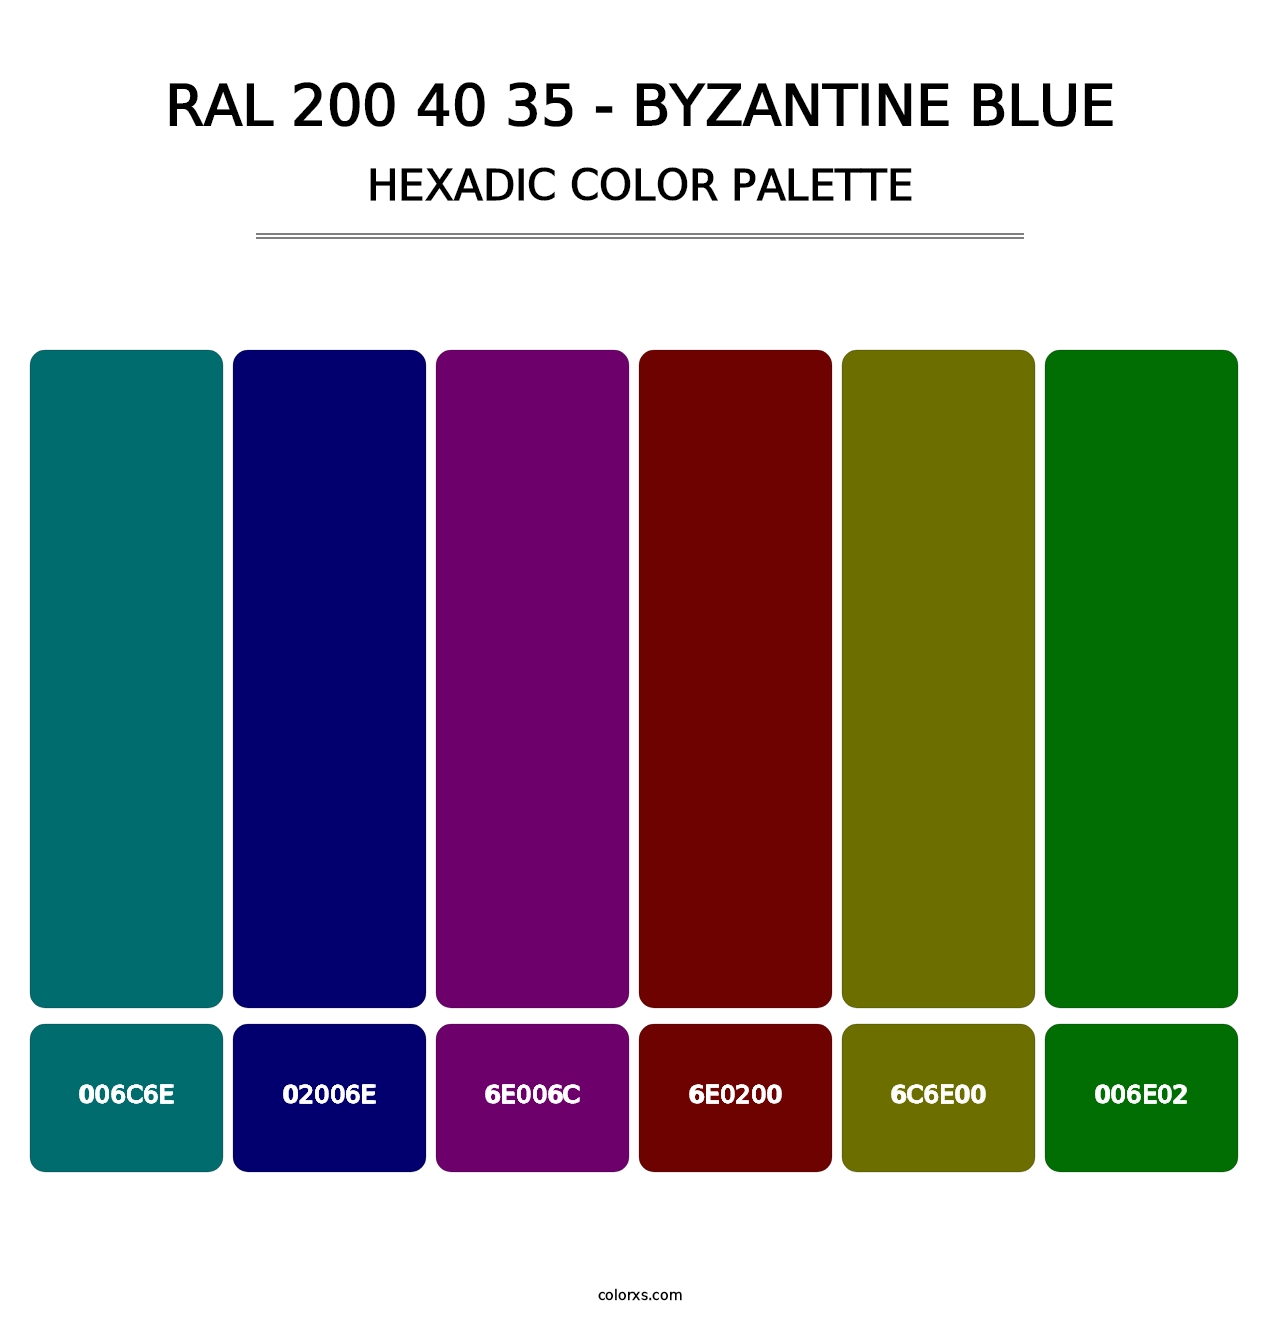 RAL 200 40 35 - Byzantine Blue - Hexadic Color Palette